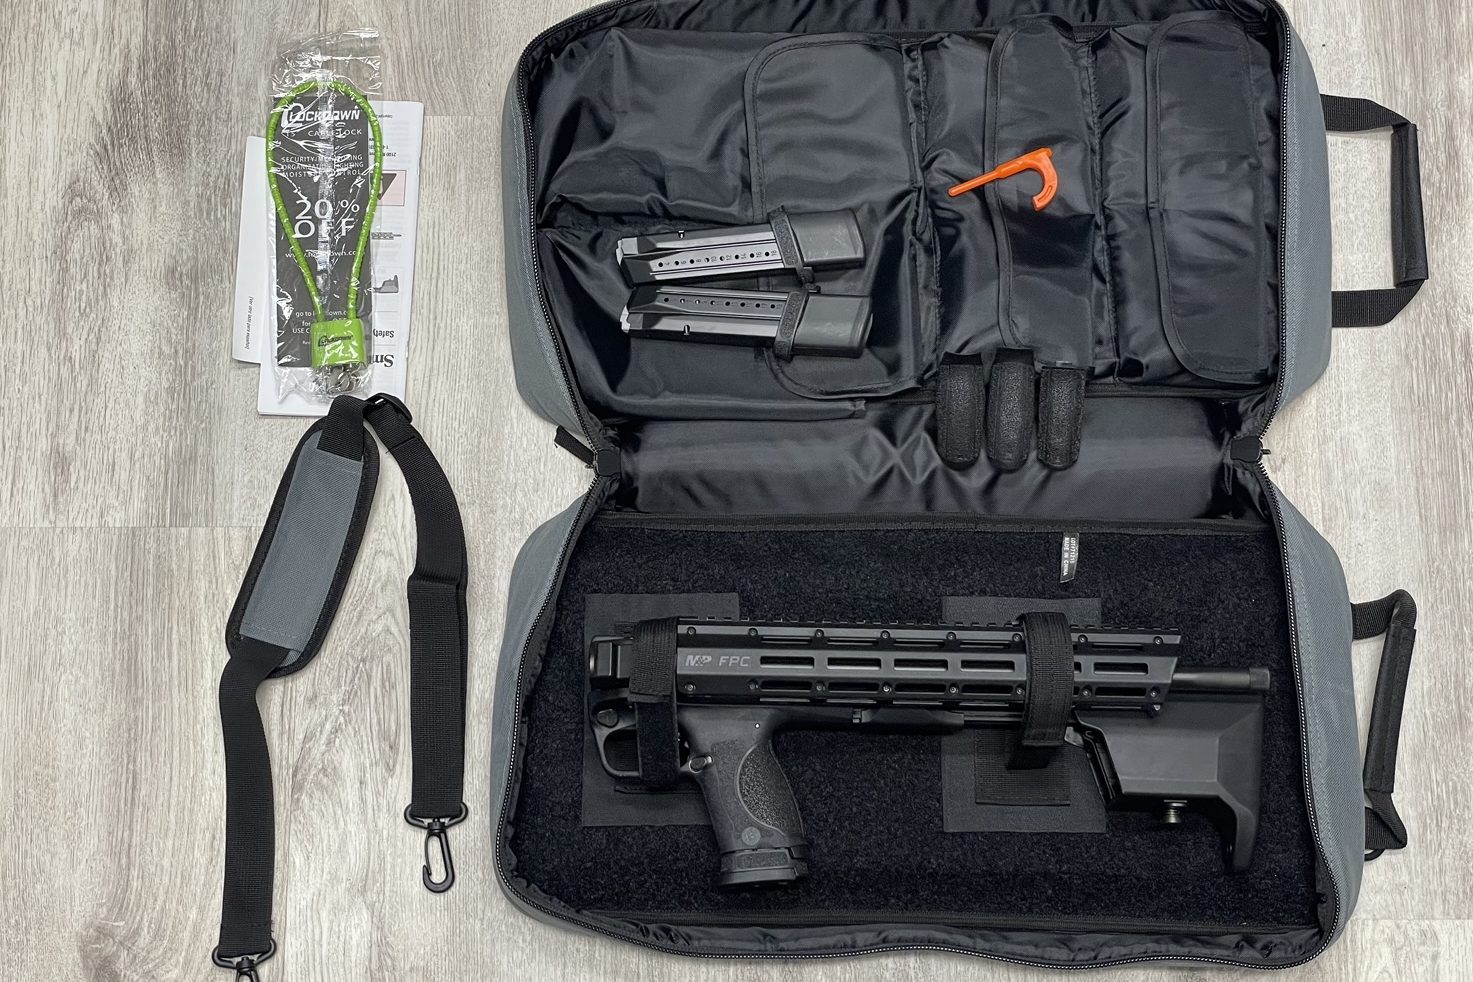 All included contents coming with the S&W FPC